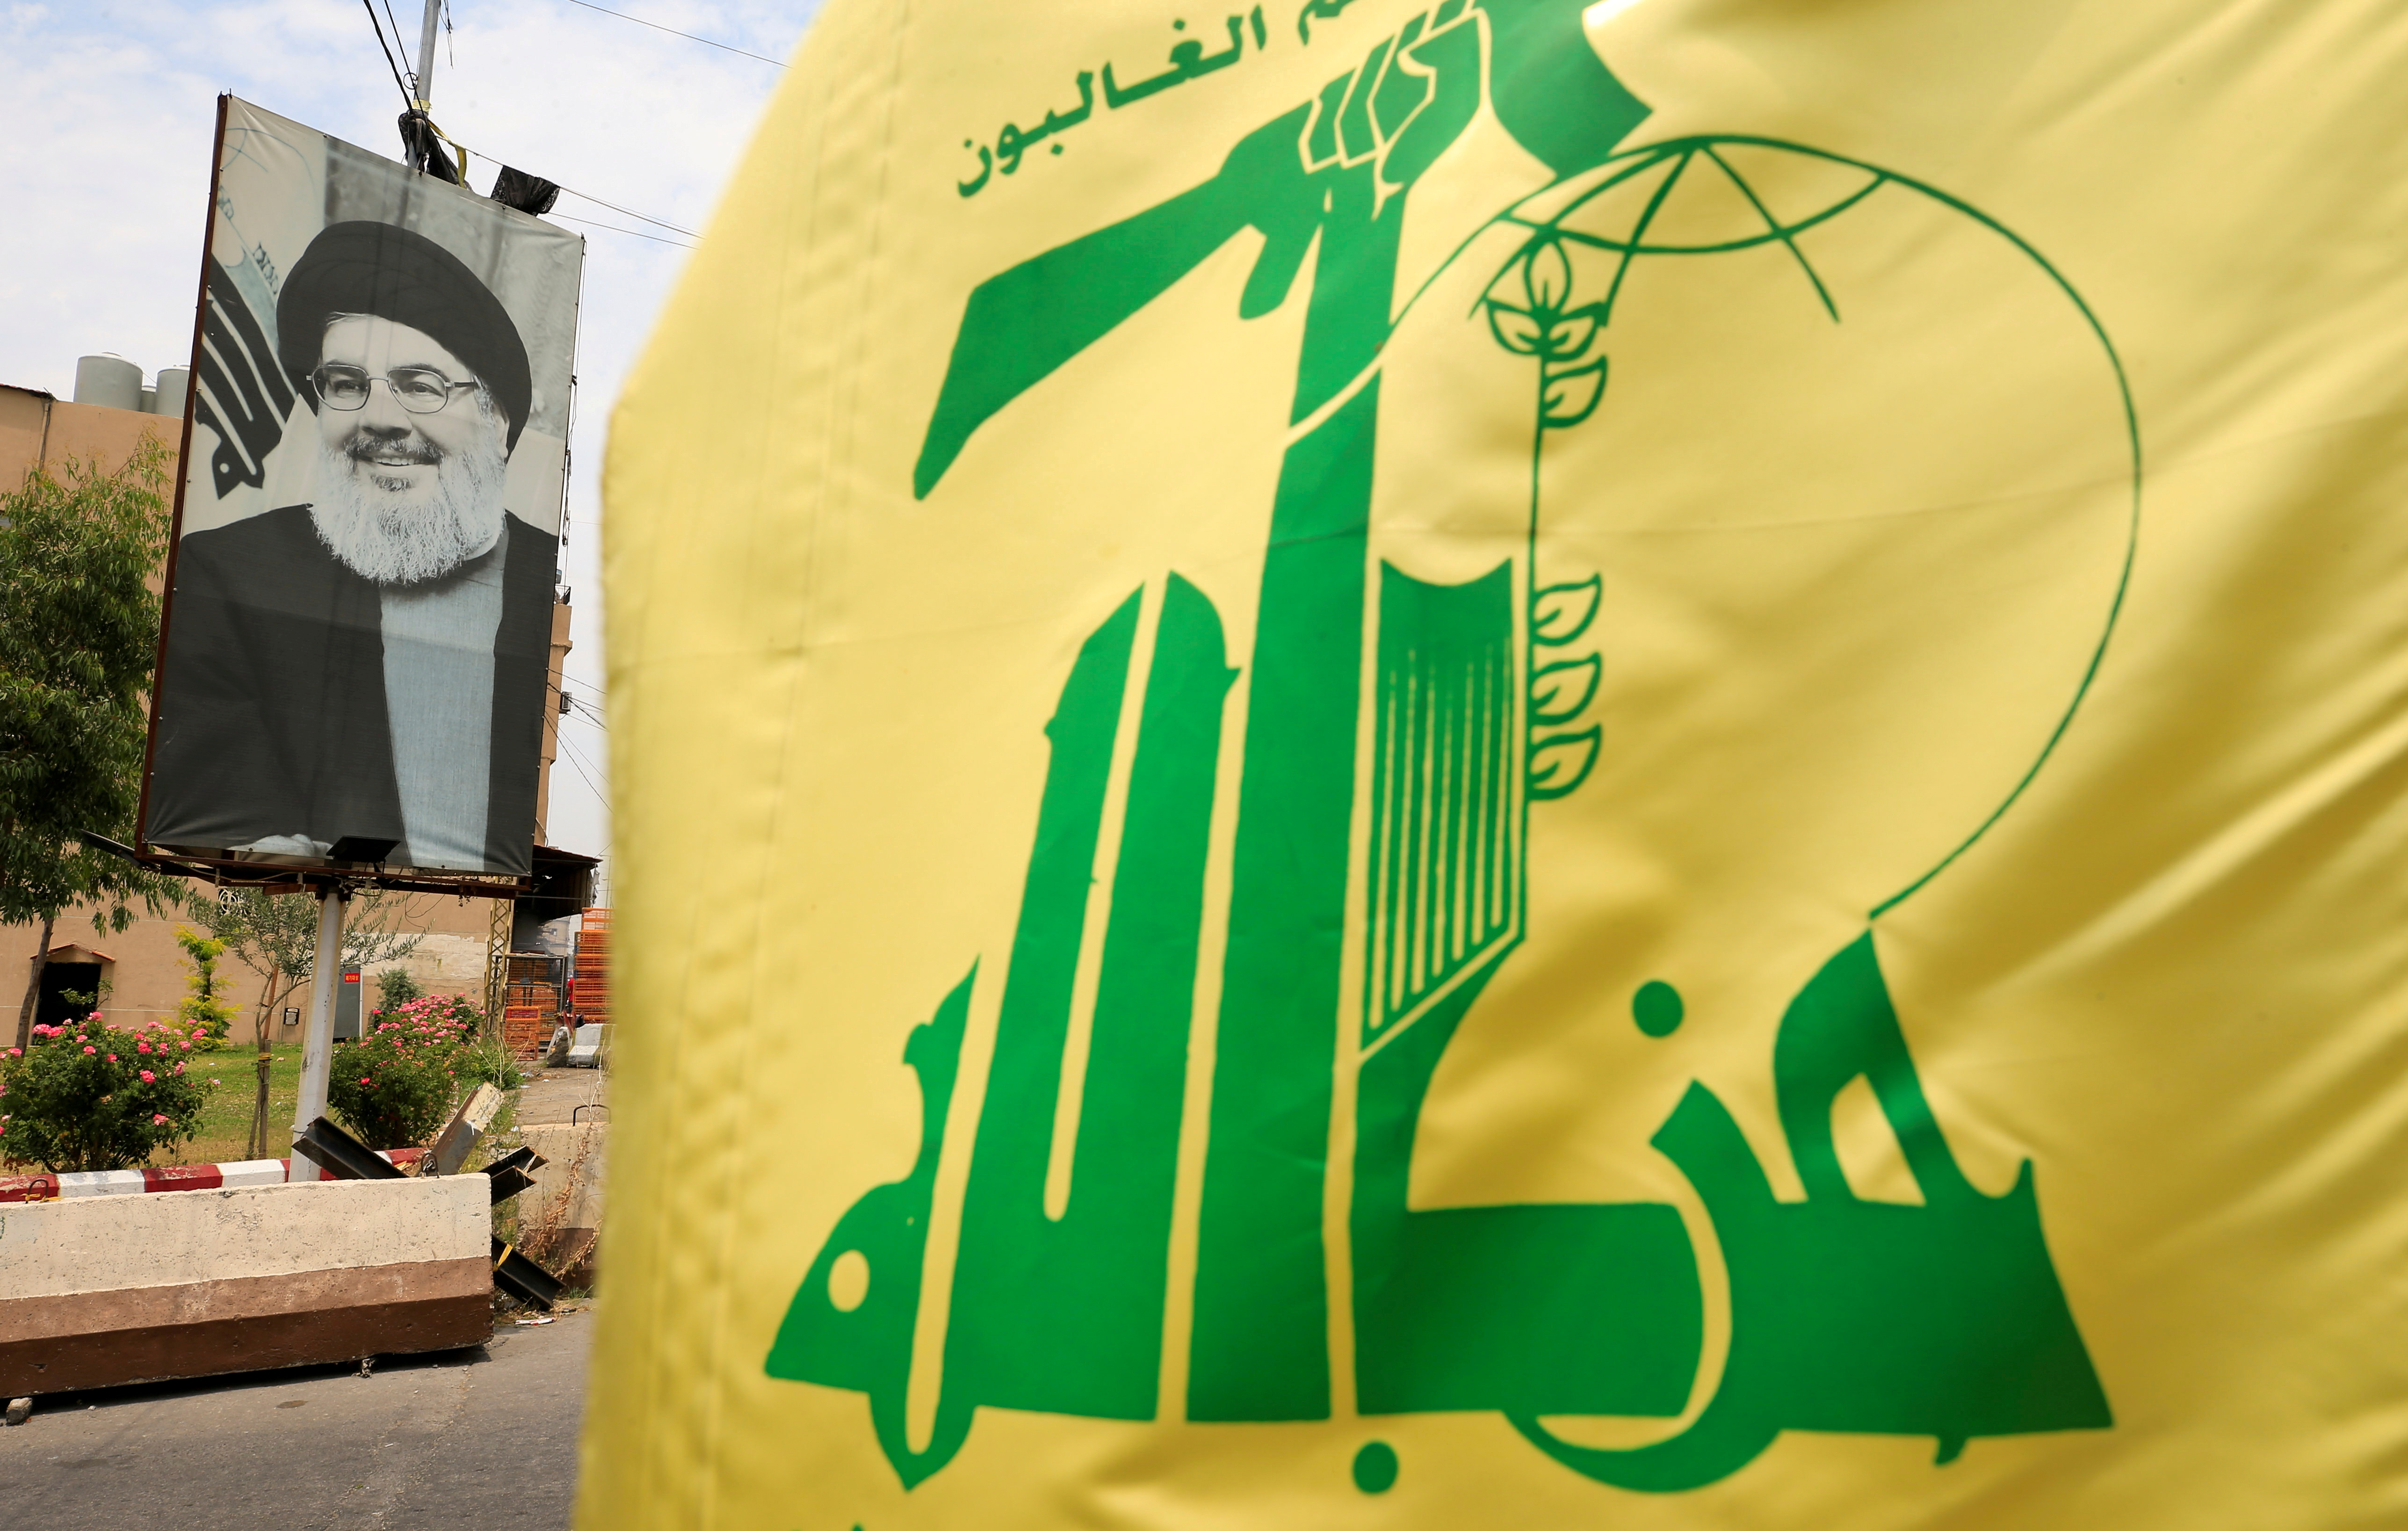 A Hezbollah flag and a poster depicting Lebanon's Hezbollah leader Sayyed Hassan Nasrallah are pictured along a street, near Sidon